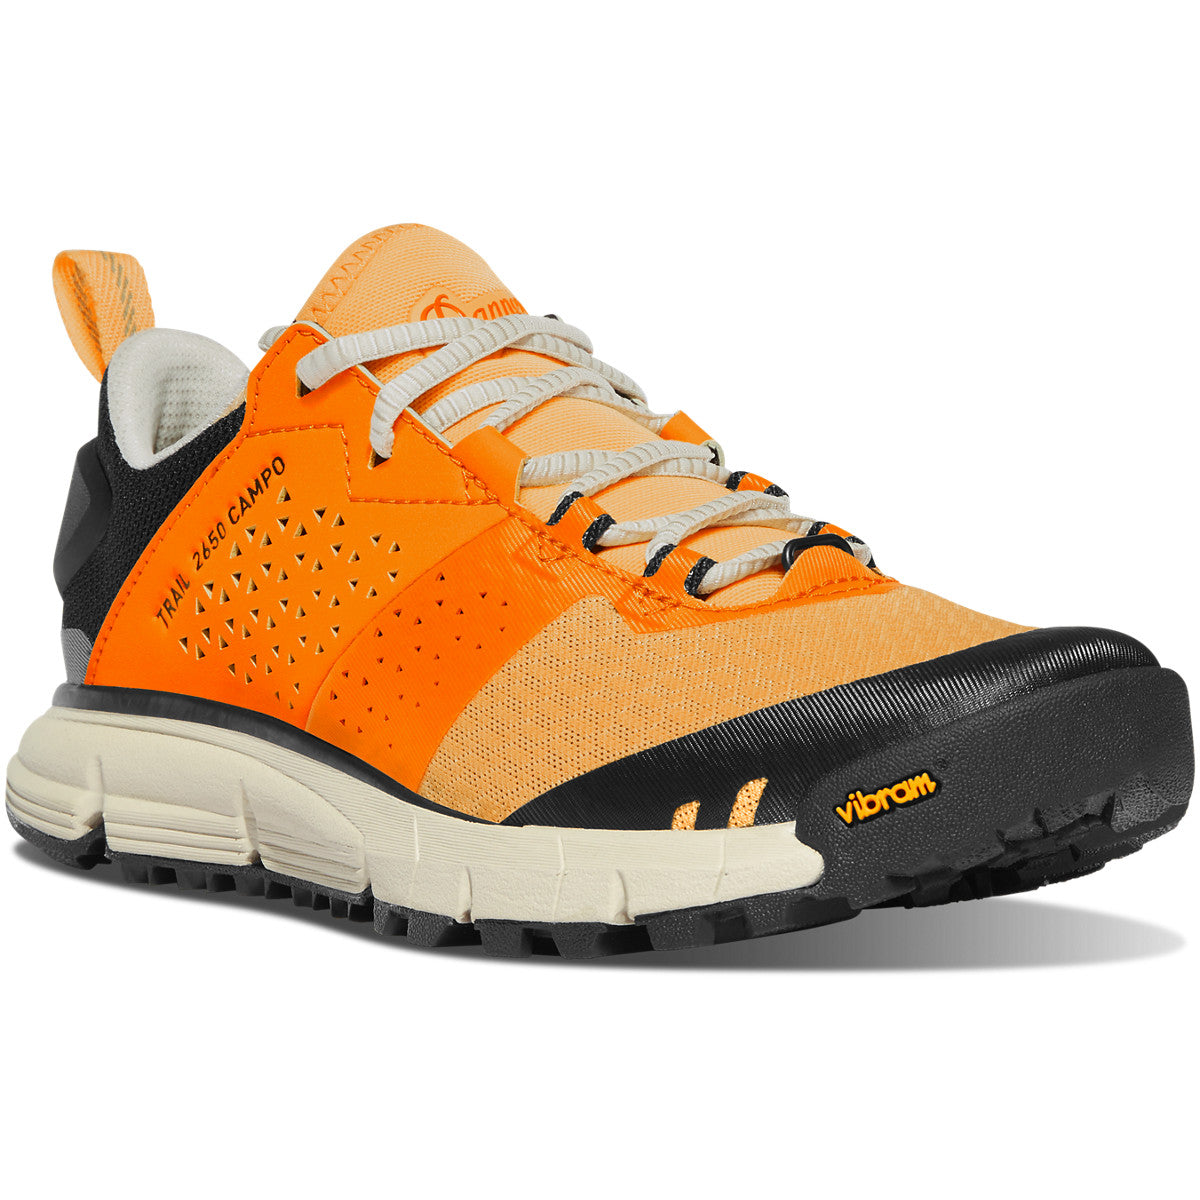 Women's Danner Trail 2650 Campo 3" Outdoor Shoe in Yam from the side view